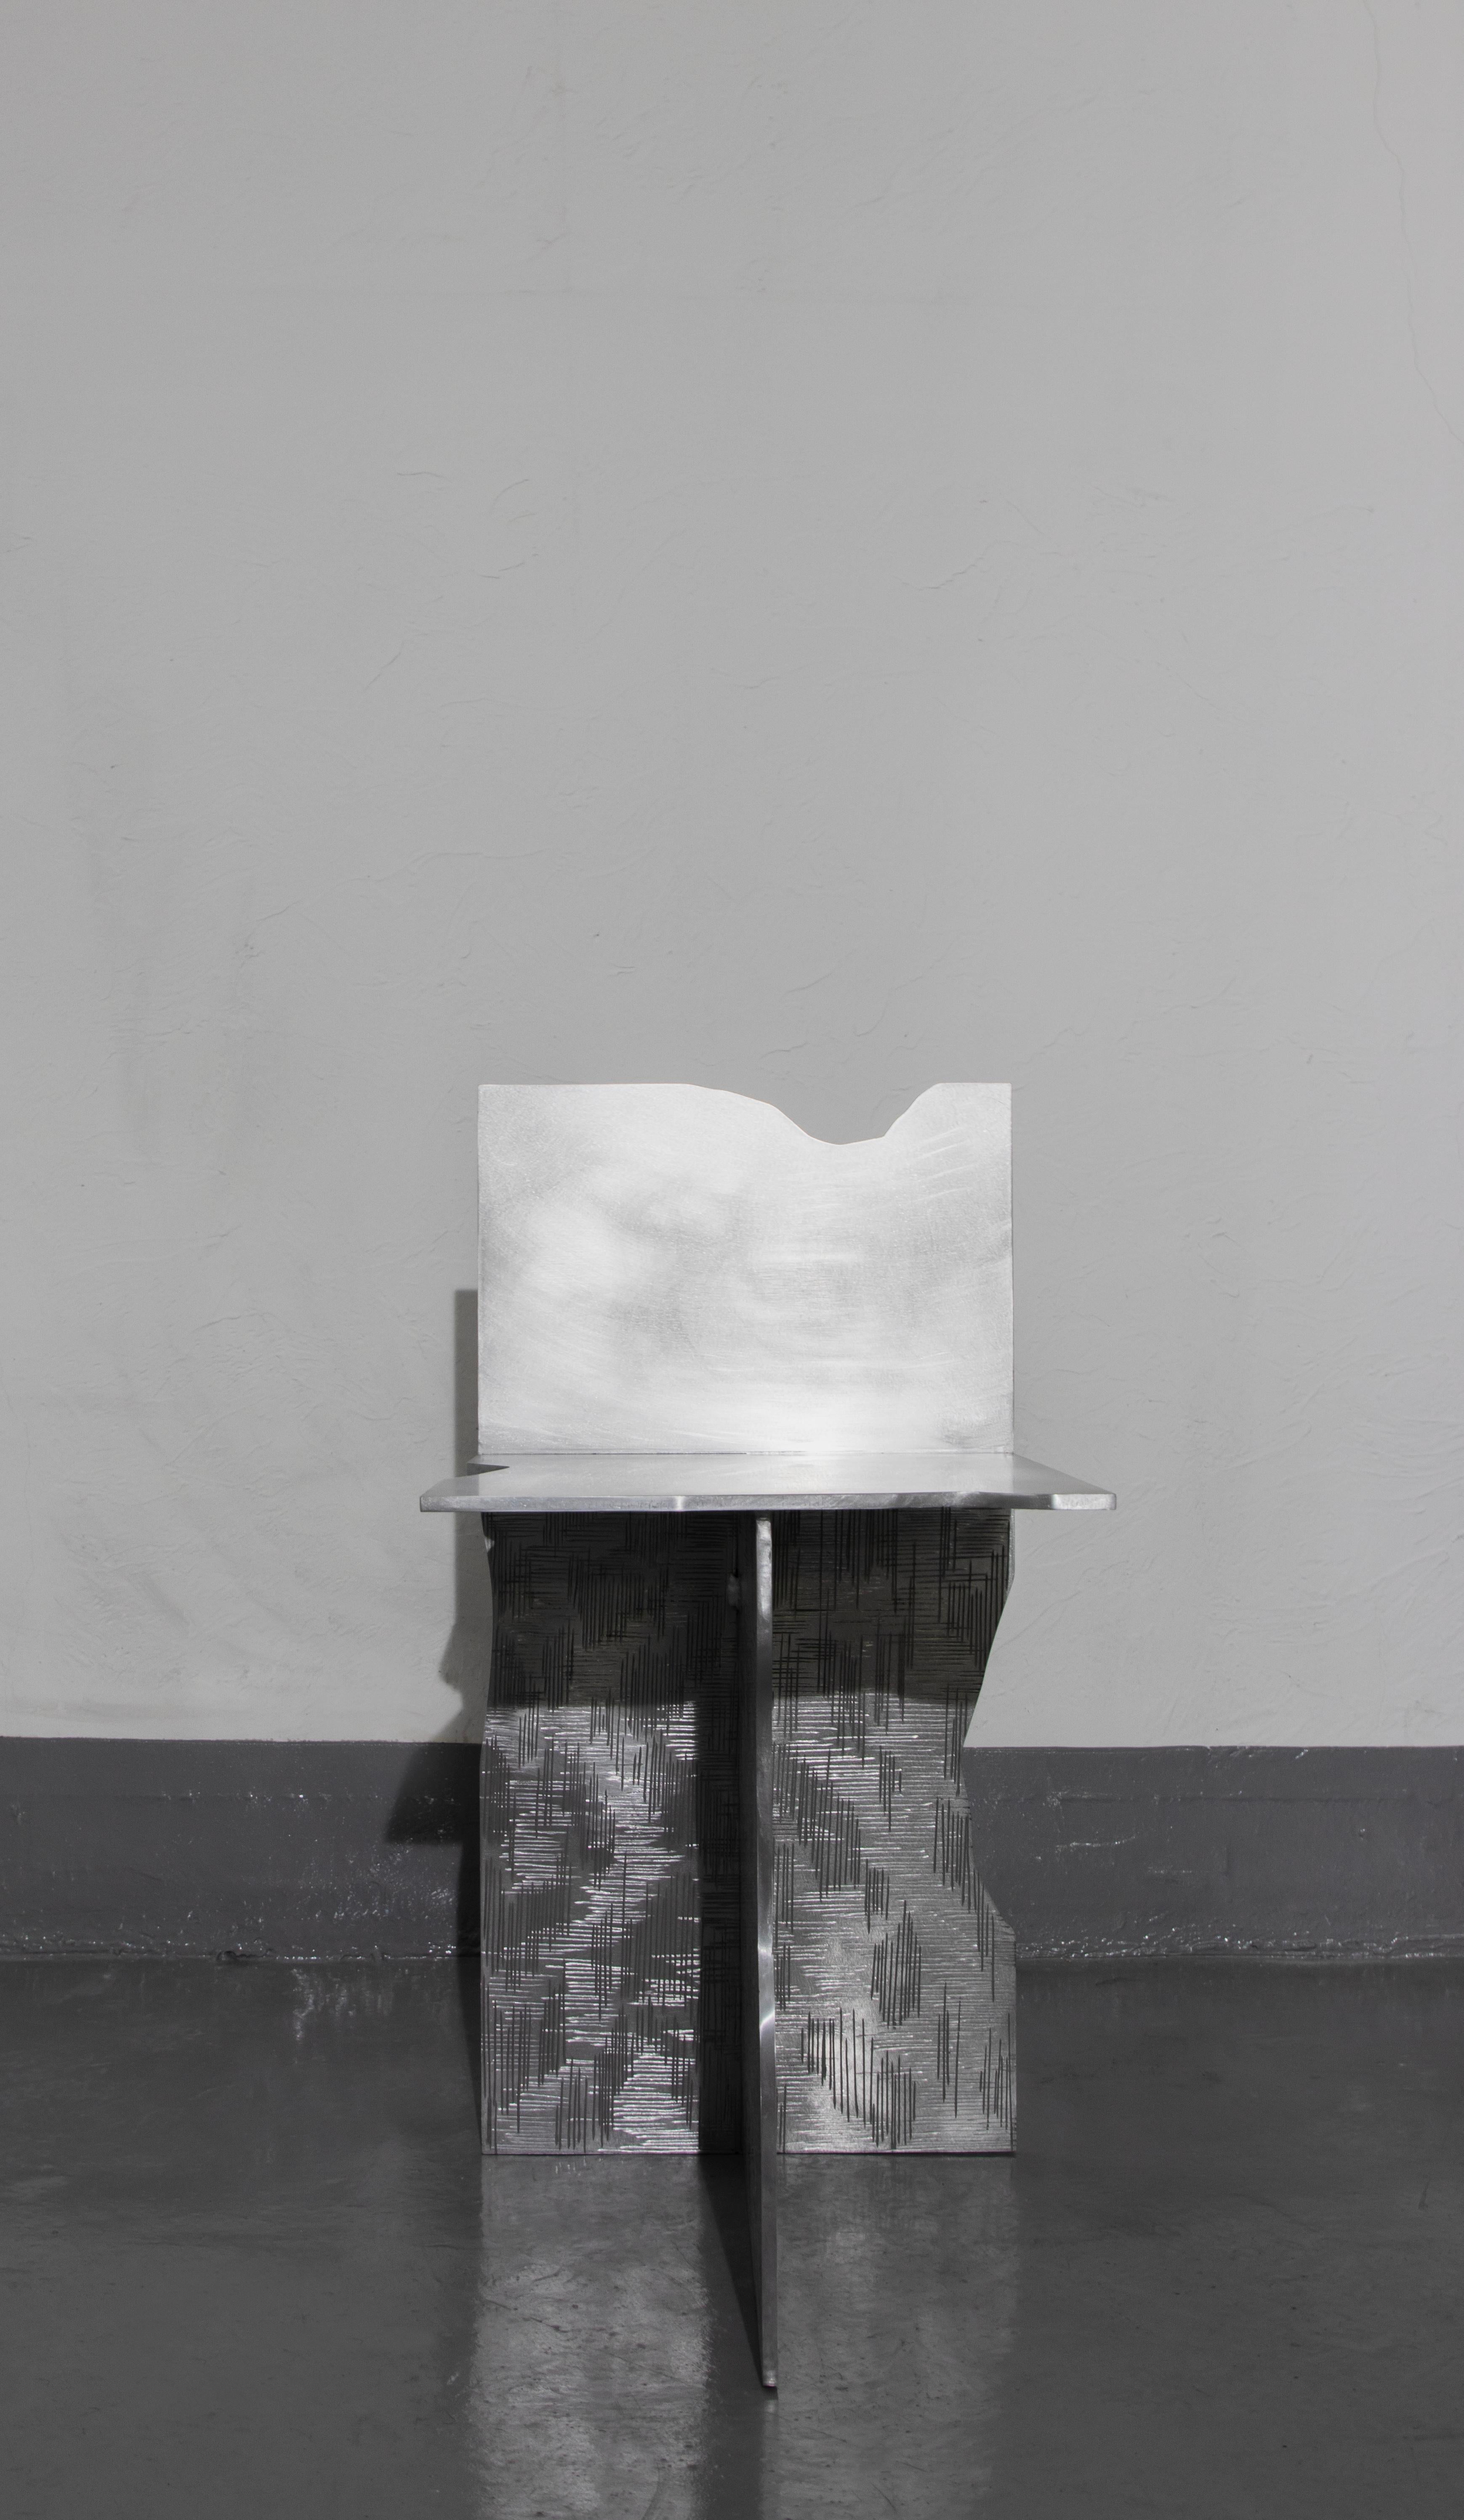 Cure 04 chair by Sundo Yoon.
Dimensions: D35 x W50 x H70 cm.
Materials: Aluminum.

Cure Series - Sundo Yoon
'The Cure Series is a series of works by designer Sundo Yoon based in Korea.
 The Cure series feels that the low self-esteem and